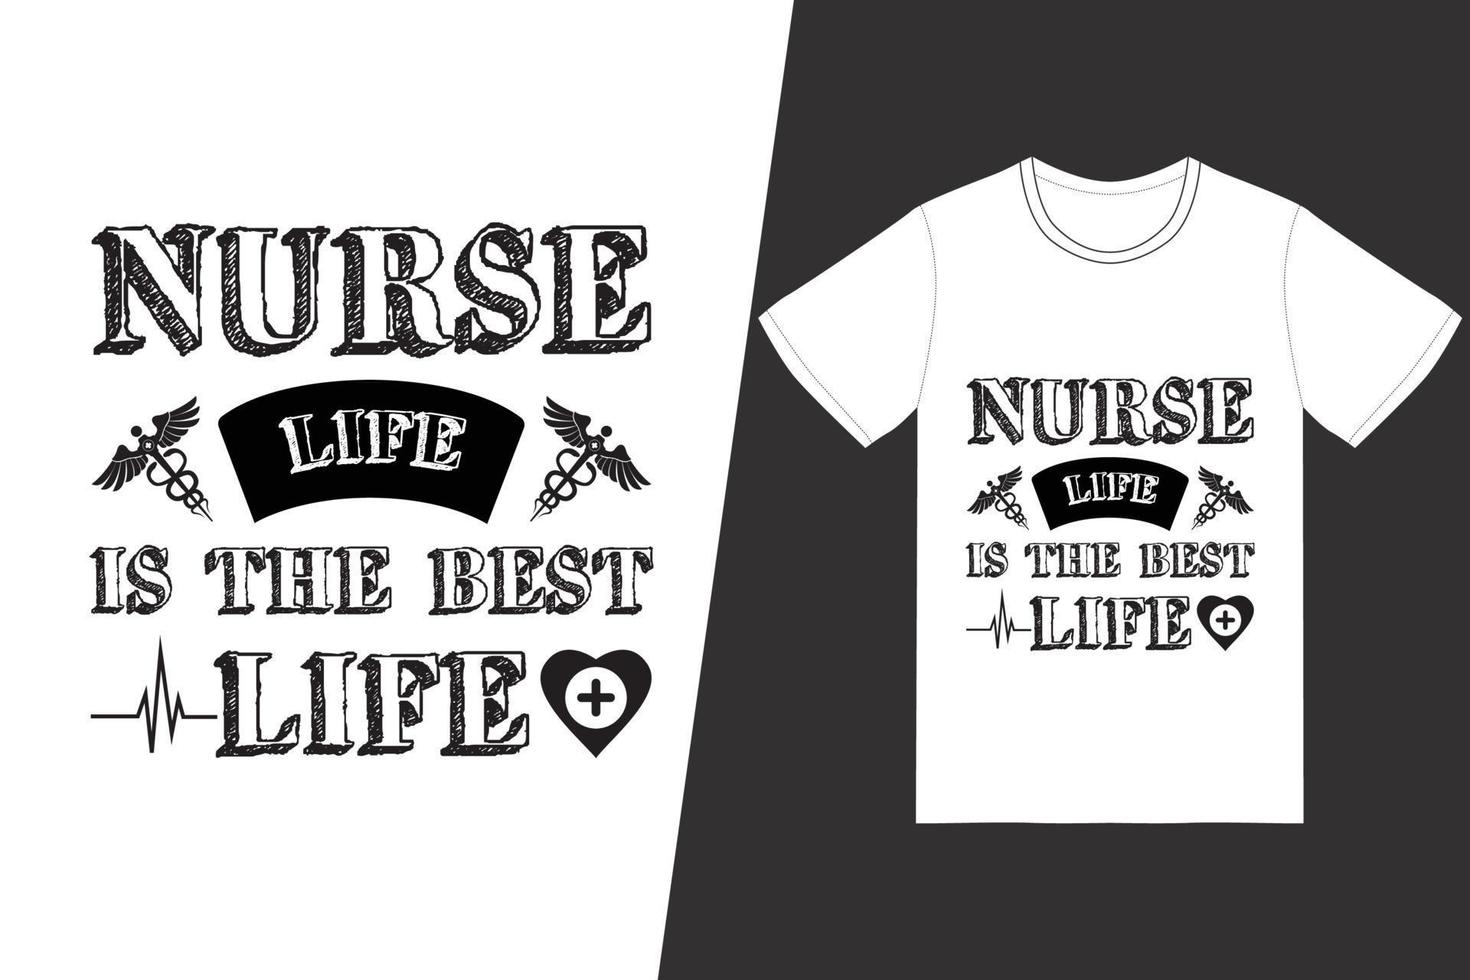 Nurse life is the best life Nurse day design. Nurse t-shirt design vector. For t-shirt print and other uses. vector